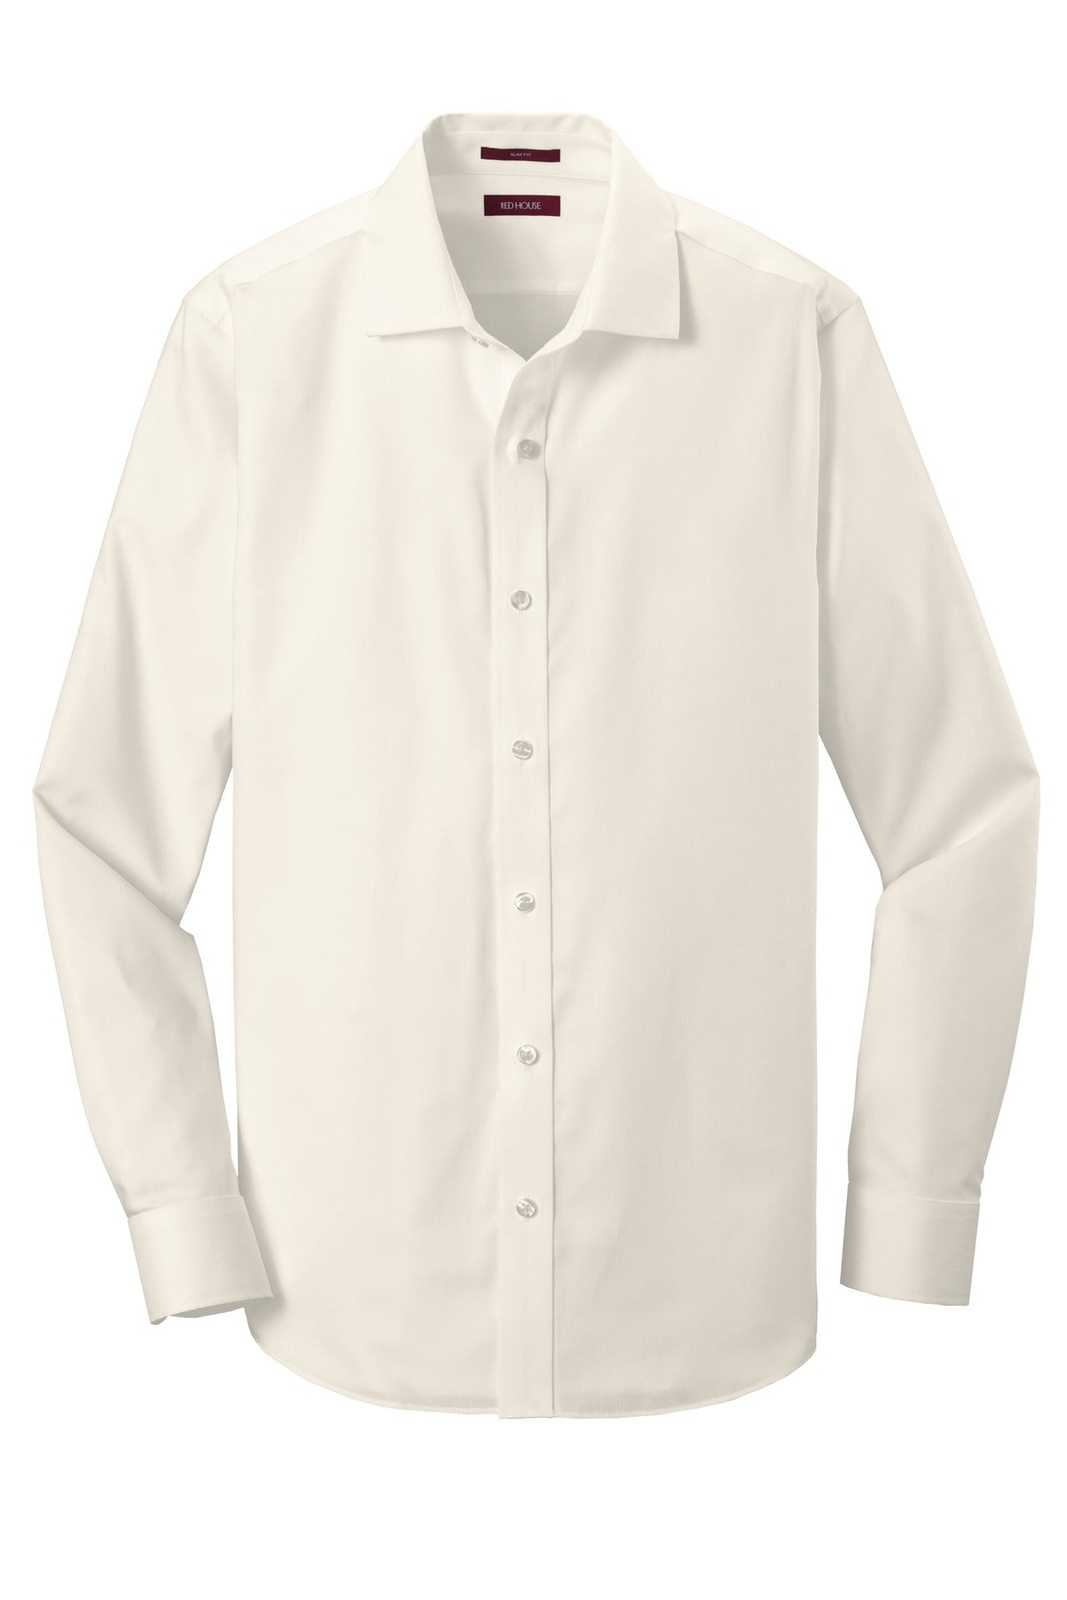 Red House RH620 Slim Fit Pinpoint Oxford Non-Iron Shirt - Ivory Chiffon - HIT a Double - 2